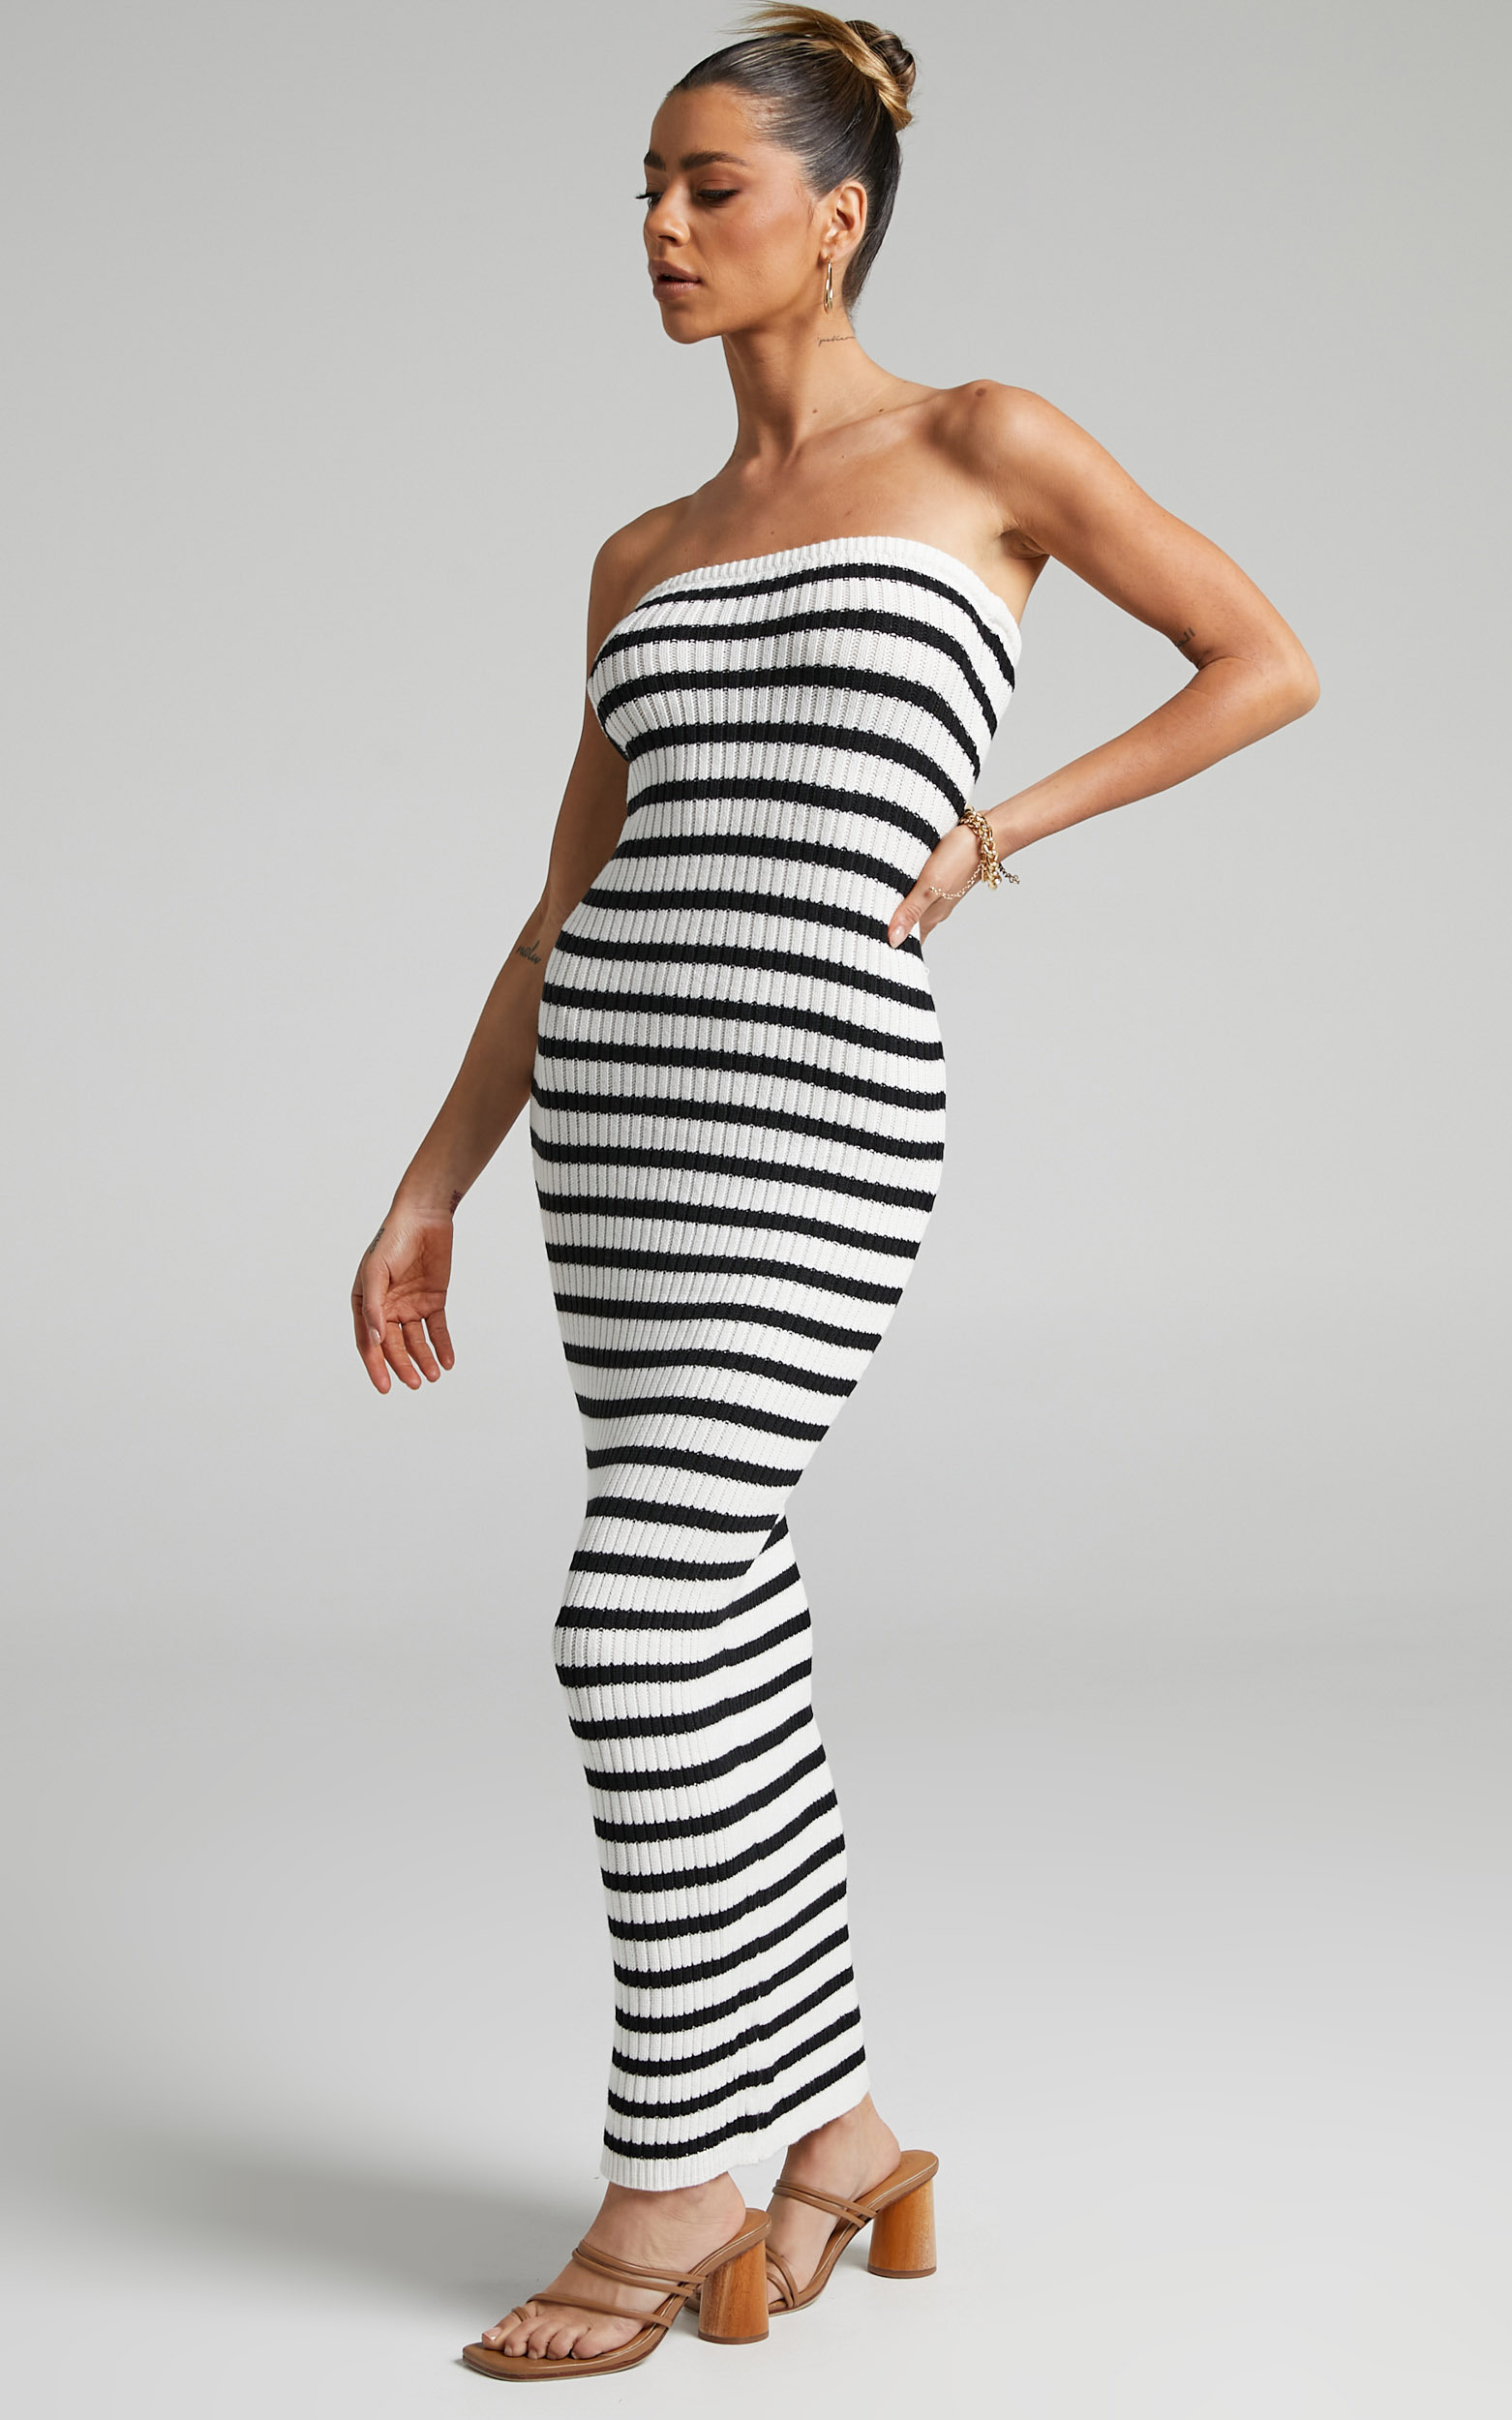 Aleena Strapless Bodycon Knit Maxi Dress in Black/White - L, BLK1, hi-res image number null